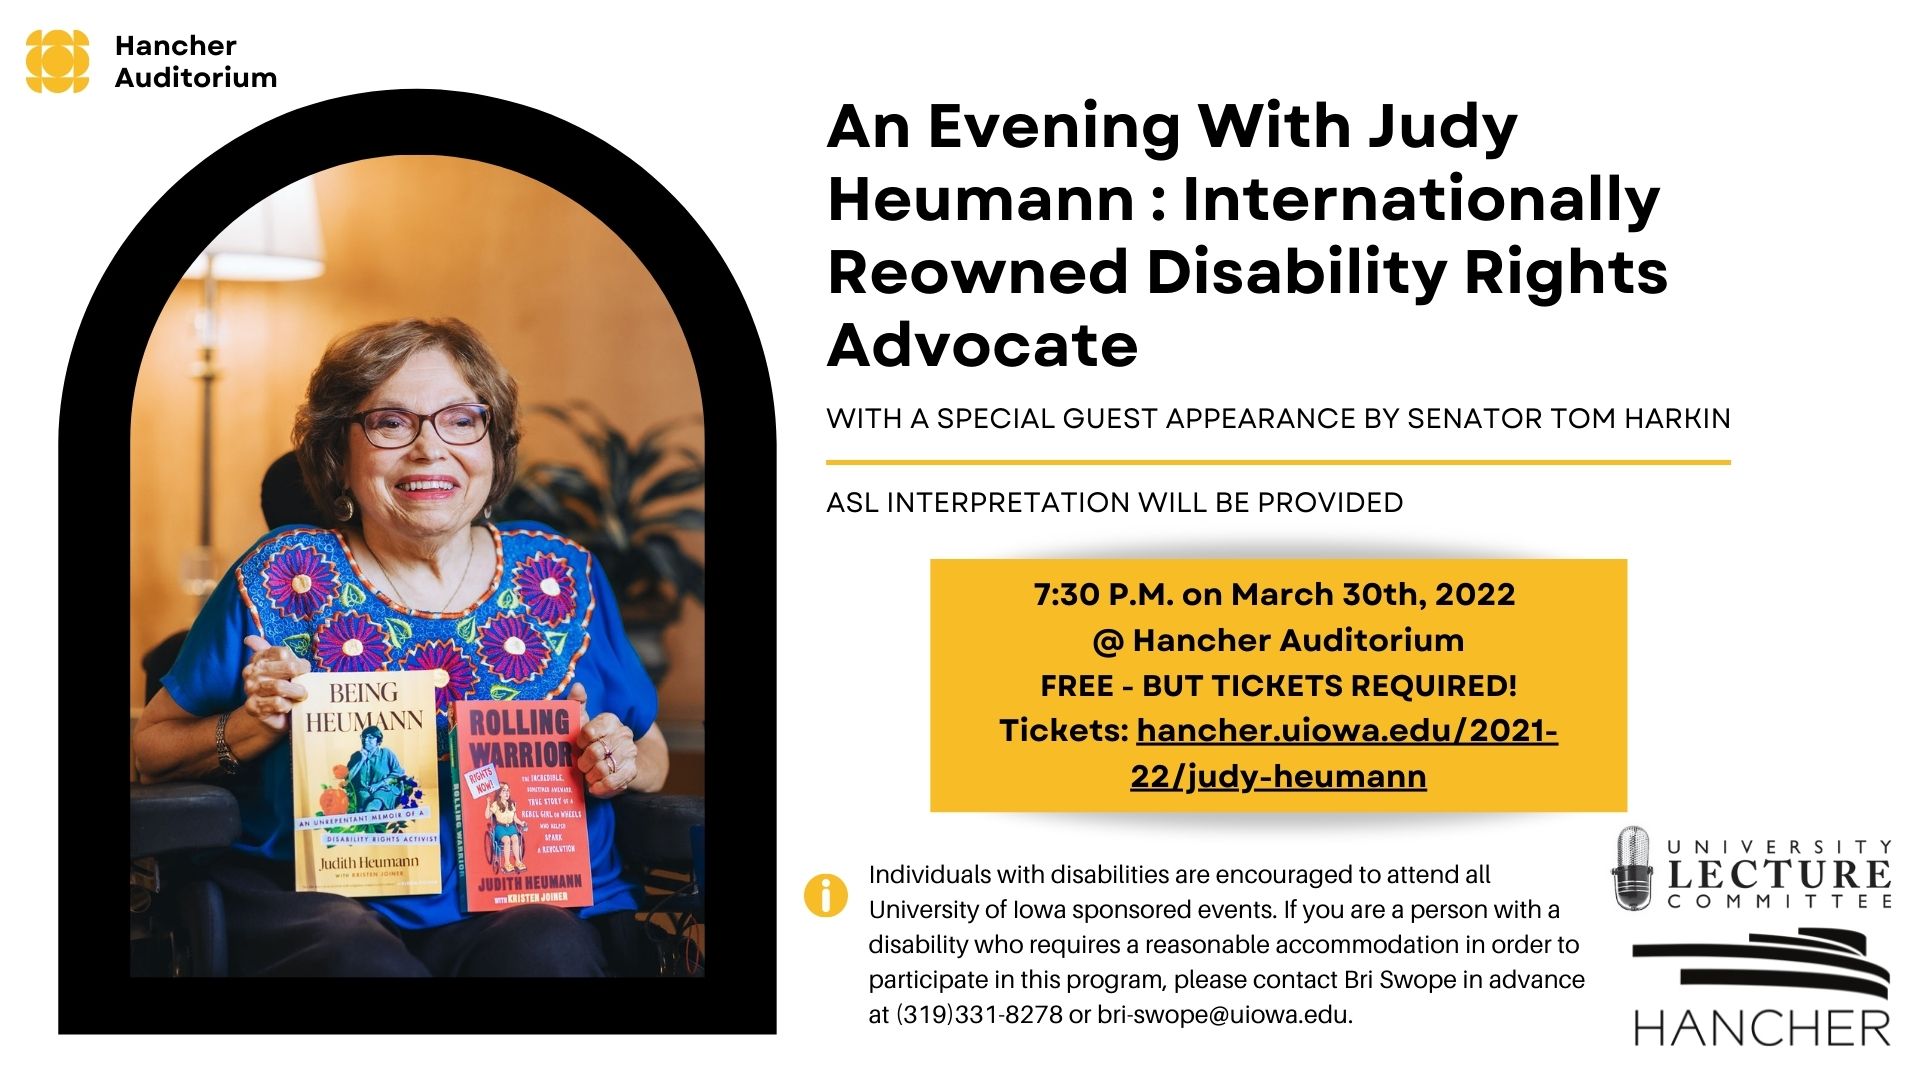 Image of Judy holding her two books Being Heumann and Rolling Warrior event at 7:30pm on March 30th, at Hancher Auditorium